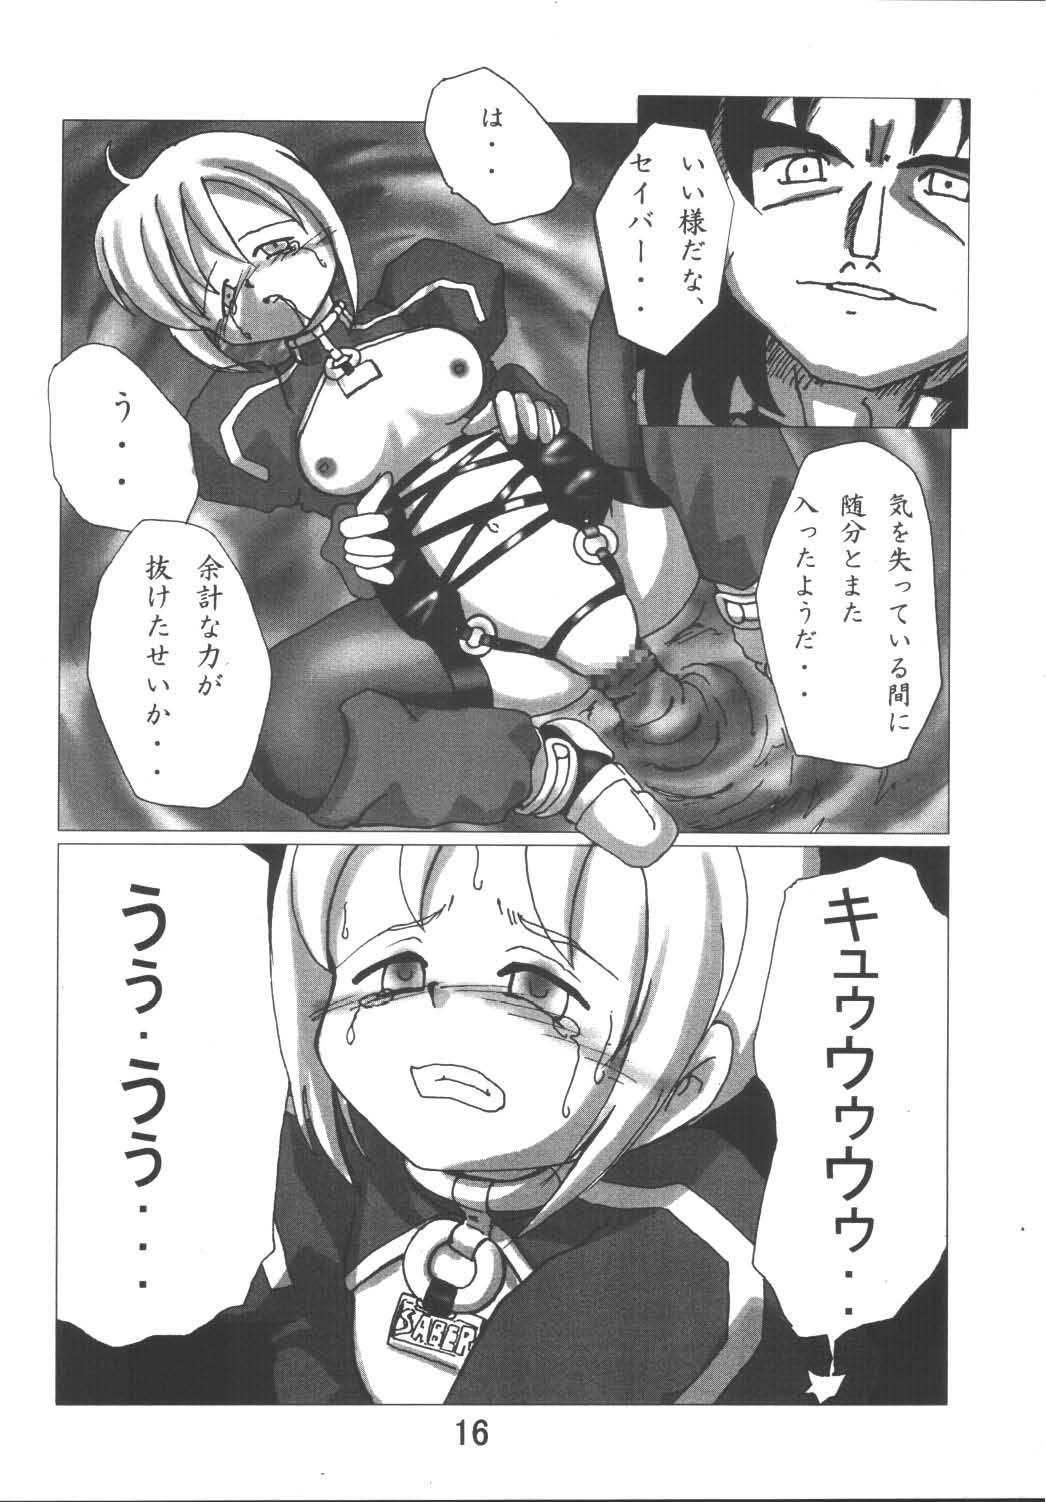 [RUBY FRUIT] Fate Nightmare For Saber (Fate/Stay Night) [RUBY FRUIT] Fate Nightmare For Saber (Fate/Stay Night)